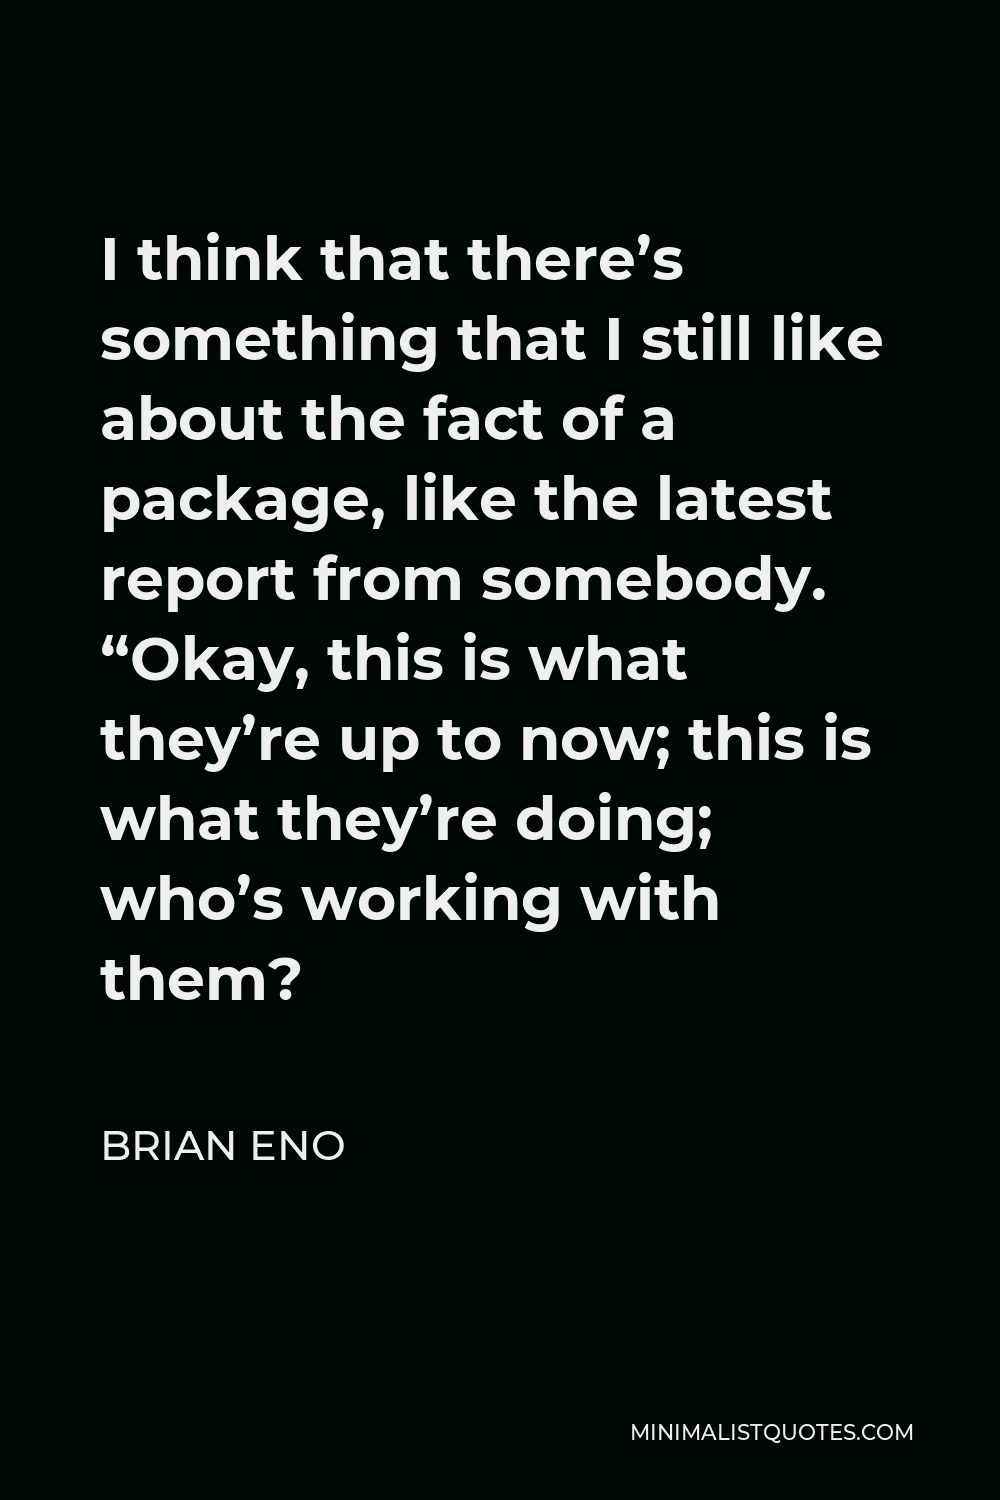 Brian Eno Quote - I think that there’s something that I still like about the fact of a package, like the latest report from somebody. “Okay, this is what they’re up to now; this is what they’re doing; who’s working with them?